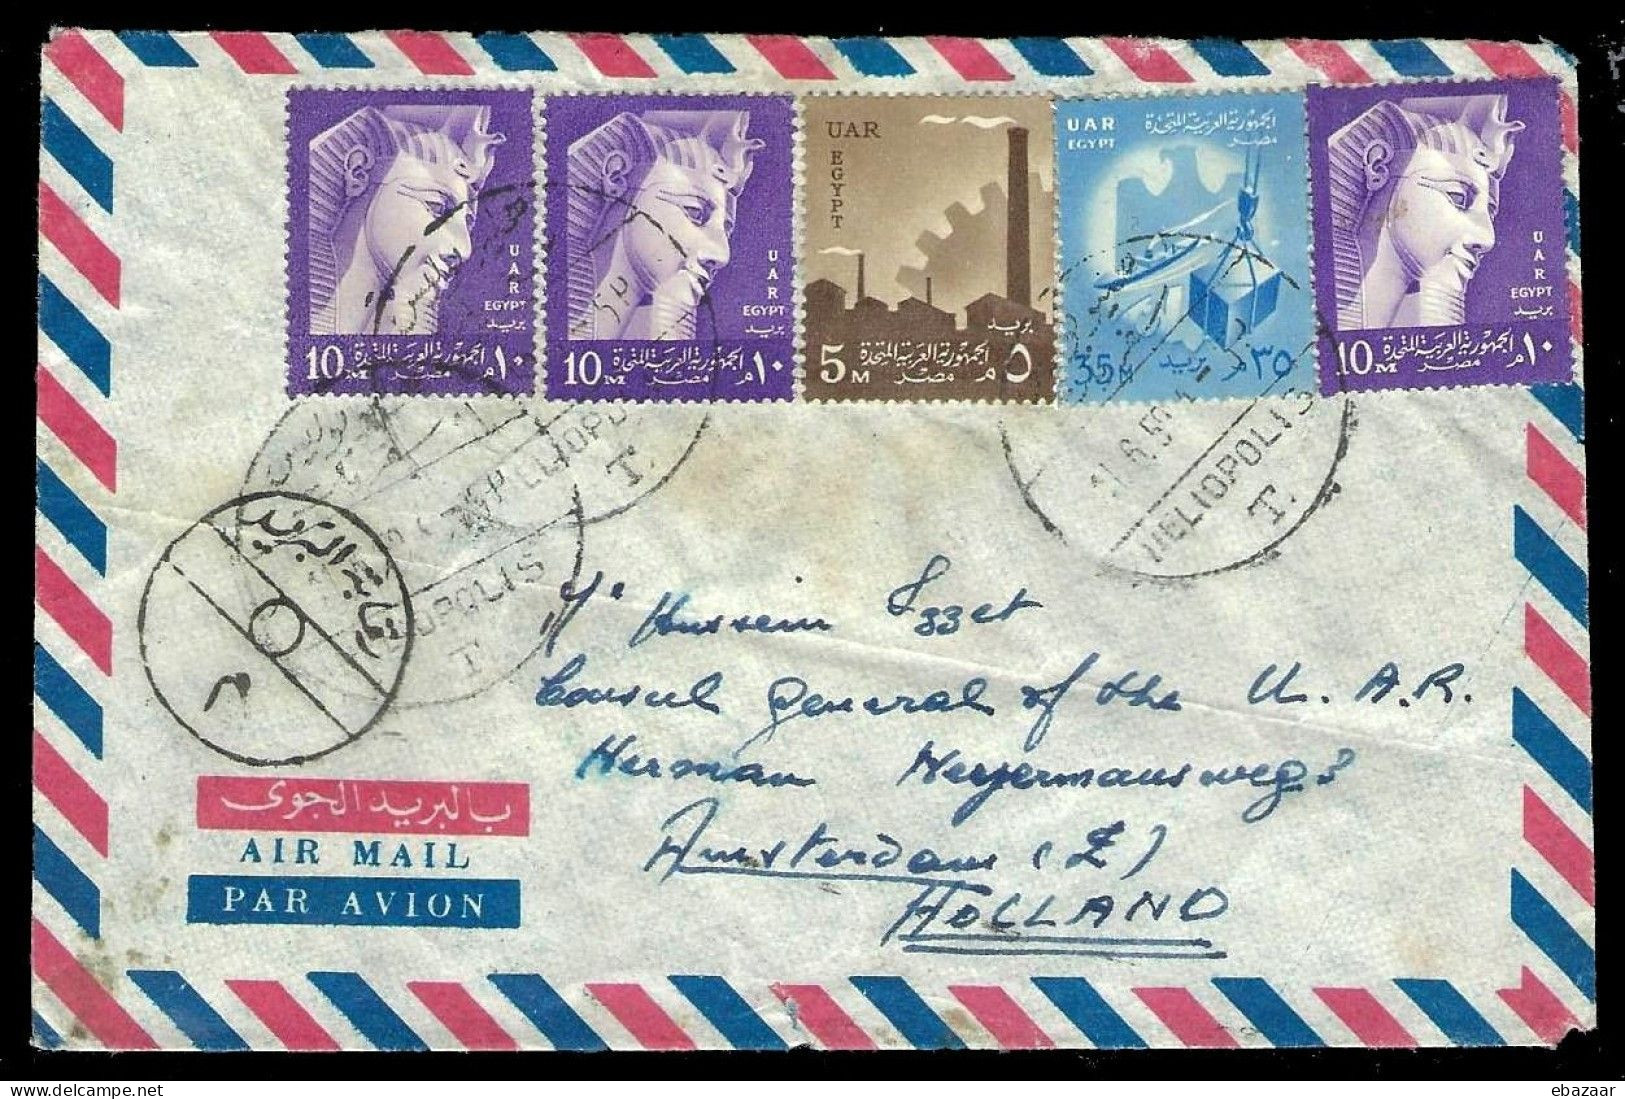 Egypt 1959 Cairo Cover To Amsterdam, Holland, Postal History - Lettres & Documents